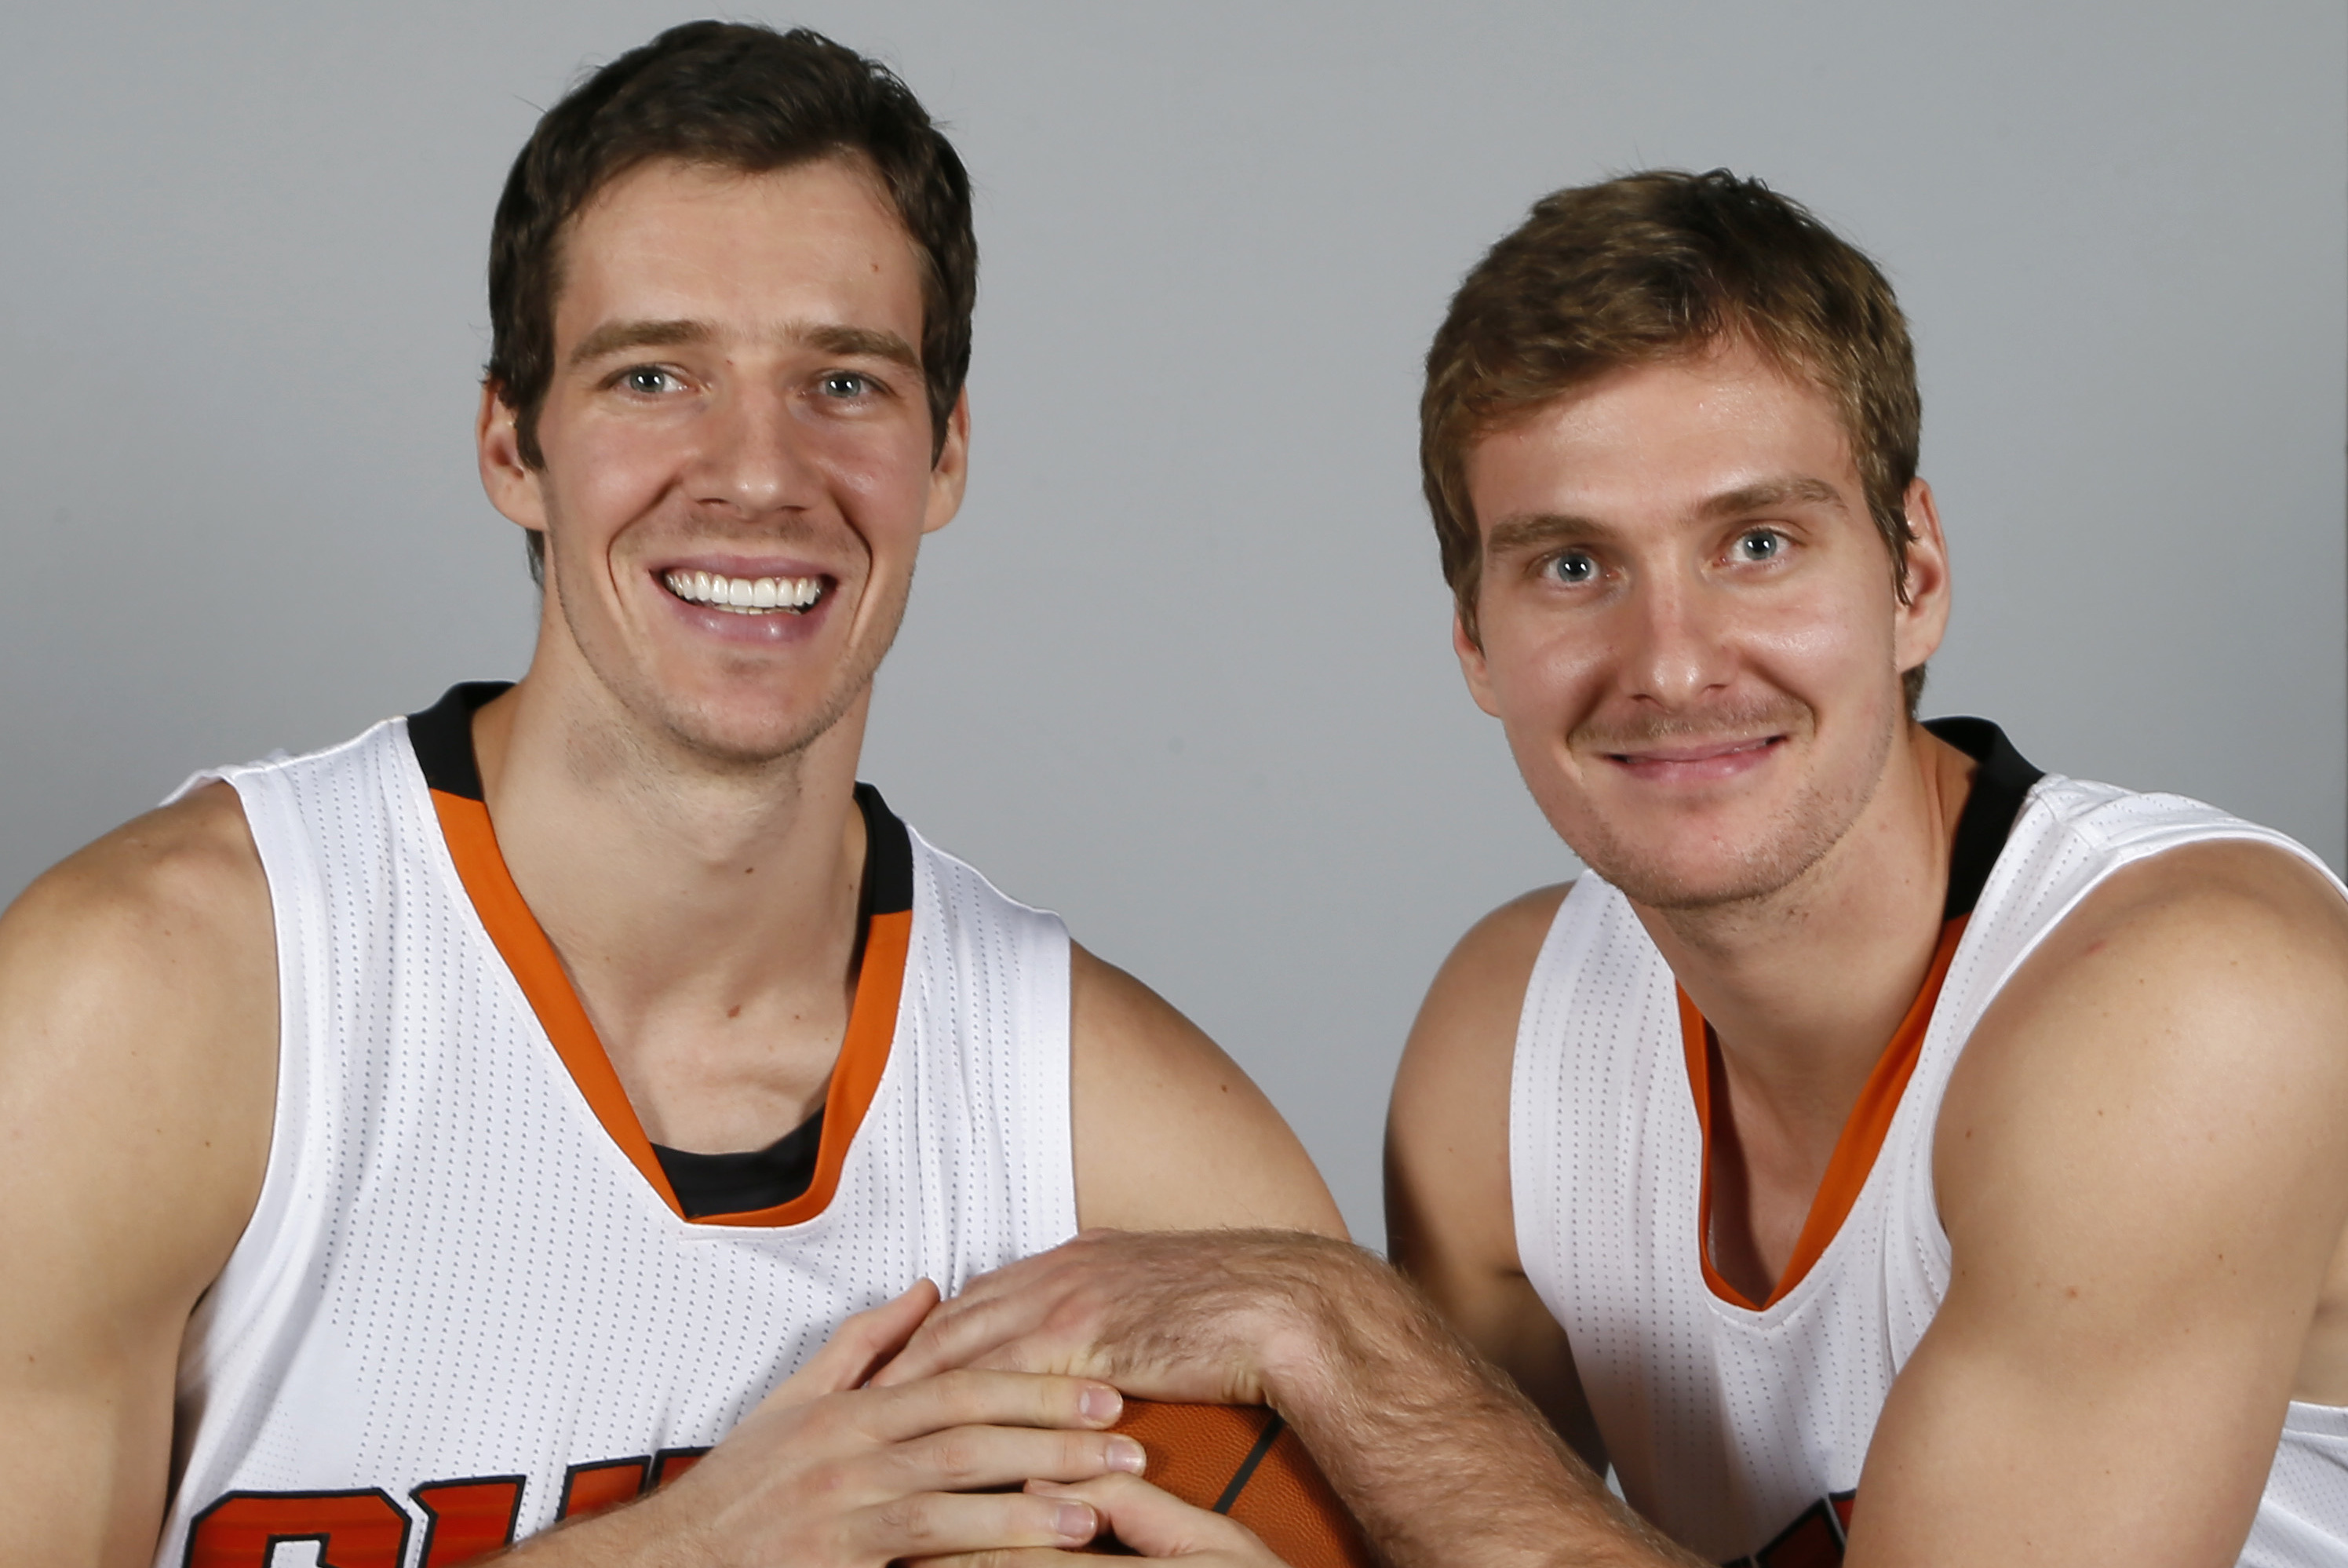 Goran Dragic - Brate Jimmy showed today why he is the leader and